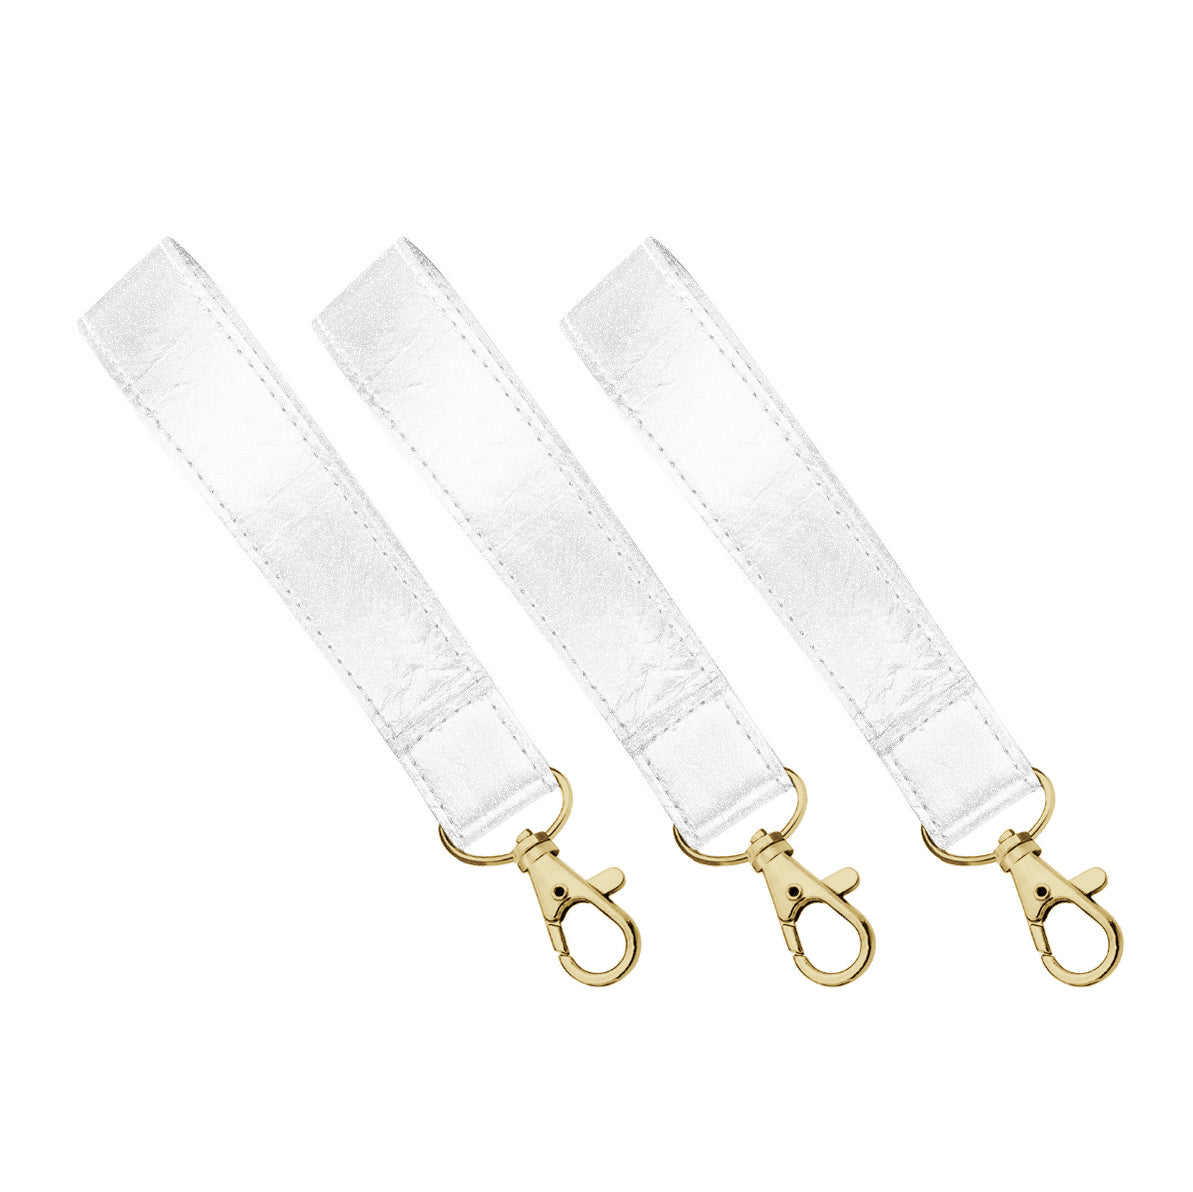 Set of Three - Shimmer White Wristlet Straps with Gold Clasps